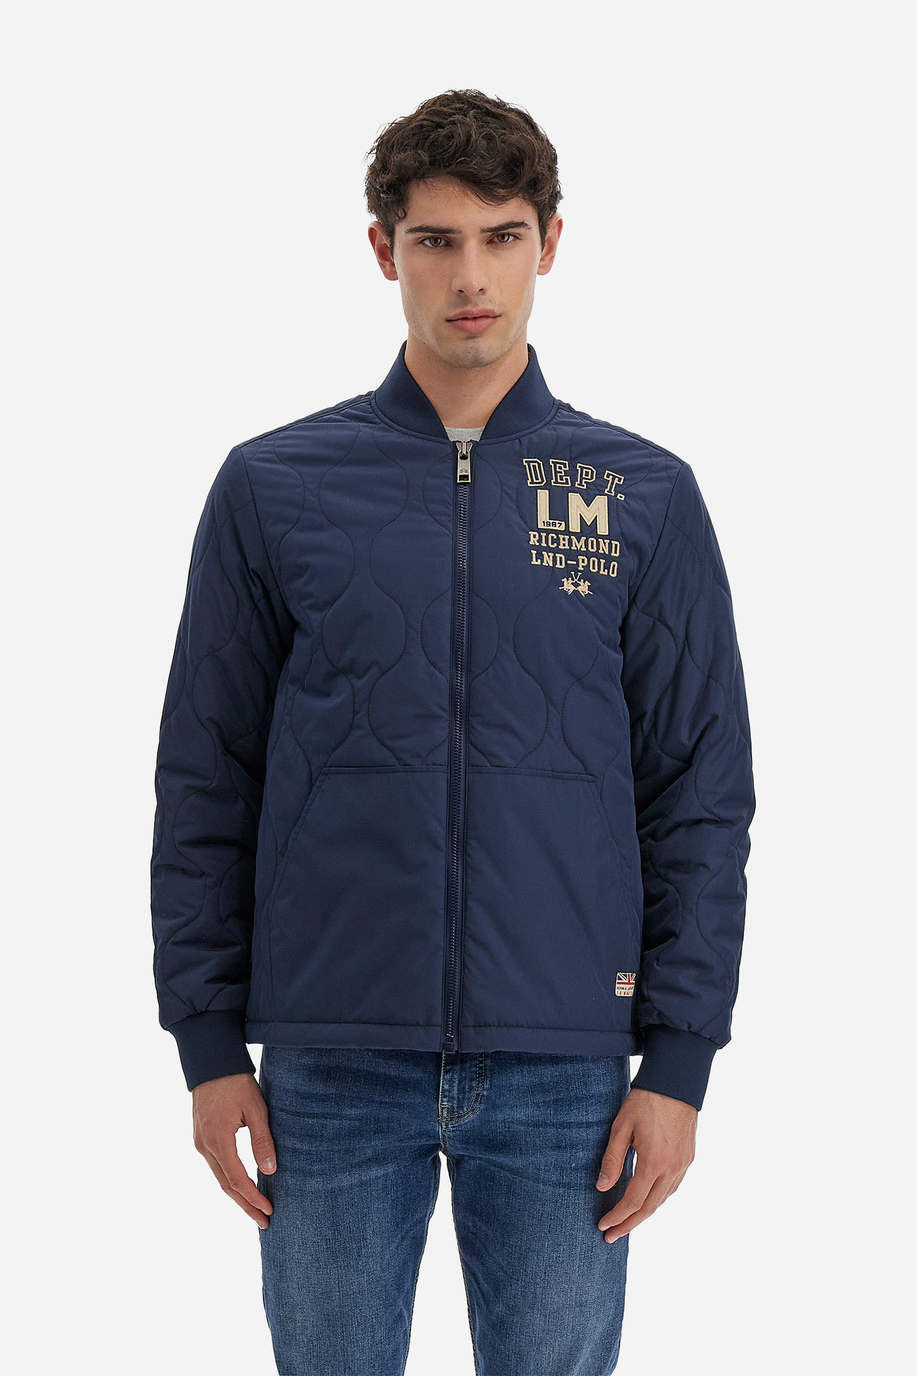 Polo Academy men's solid color high neck full zip jacket with hidden pockets - Vanni - Outerwear and Jackets | La Martina - Official Online Shop